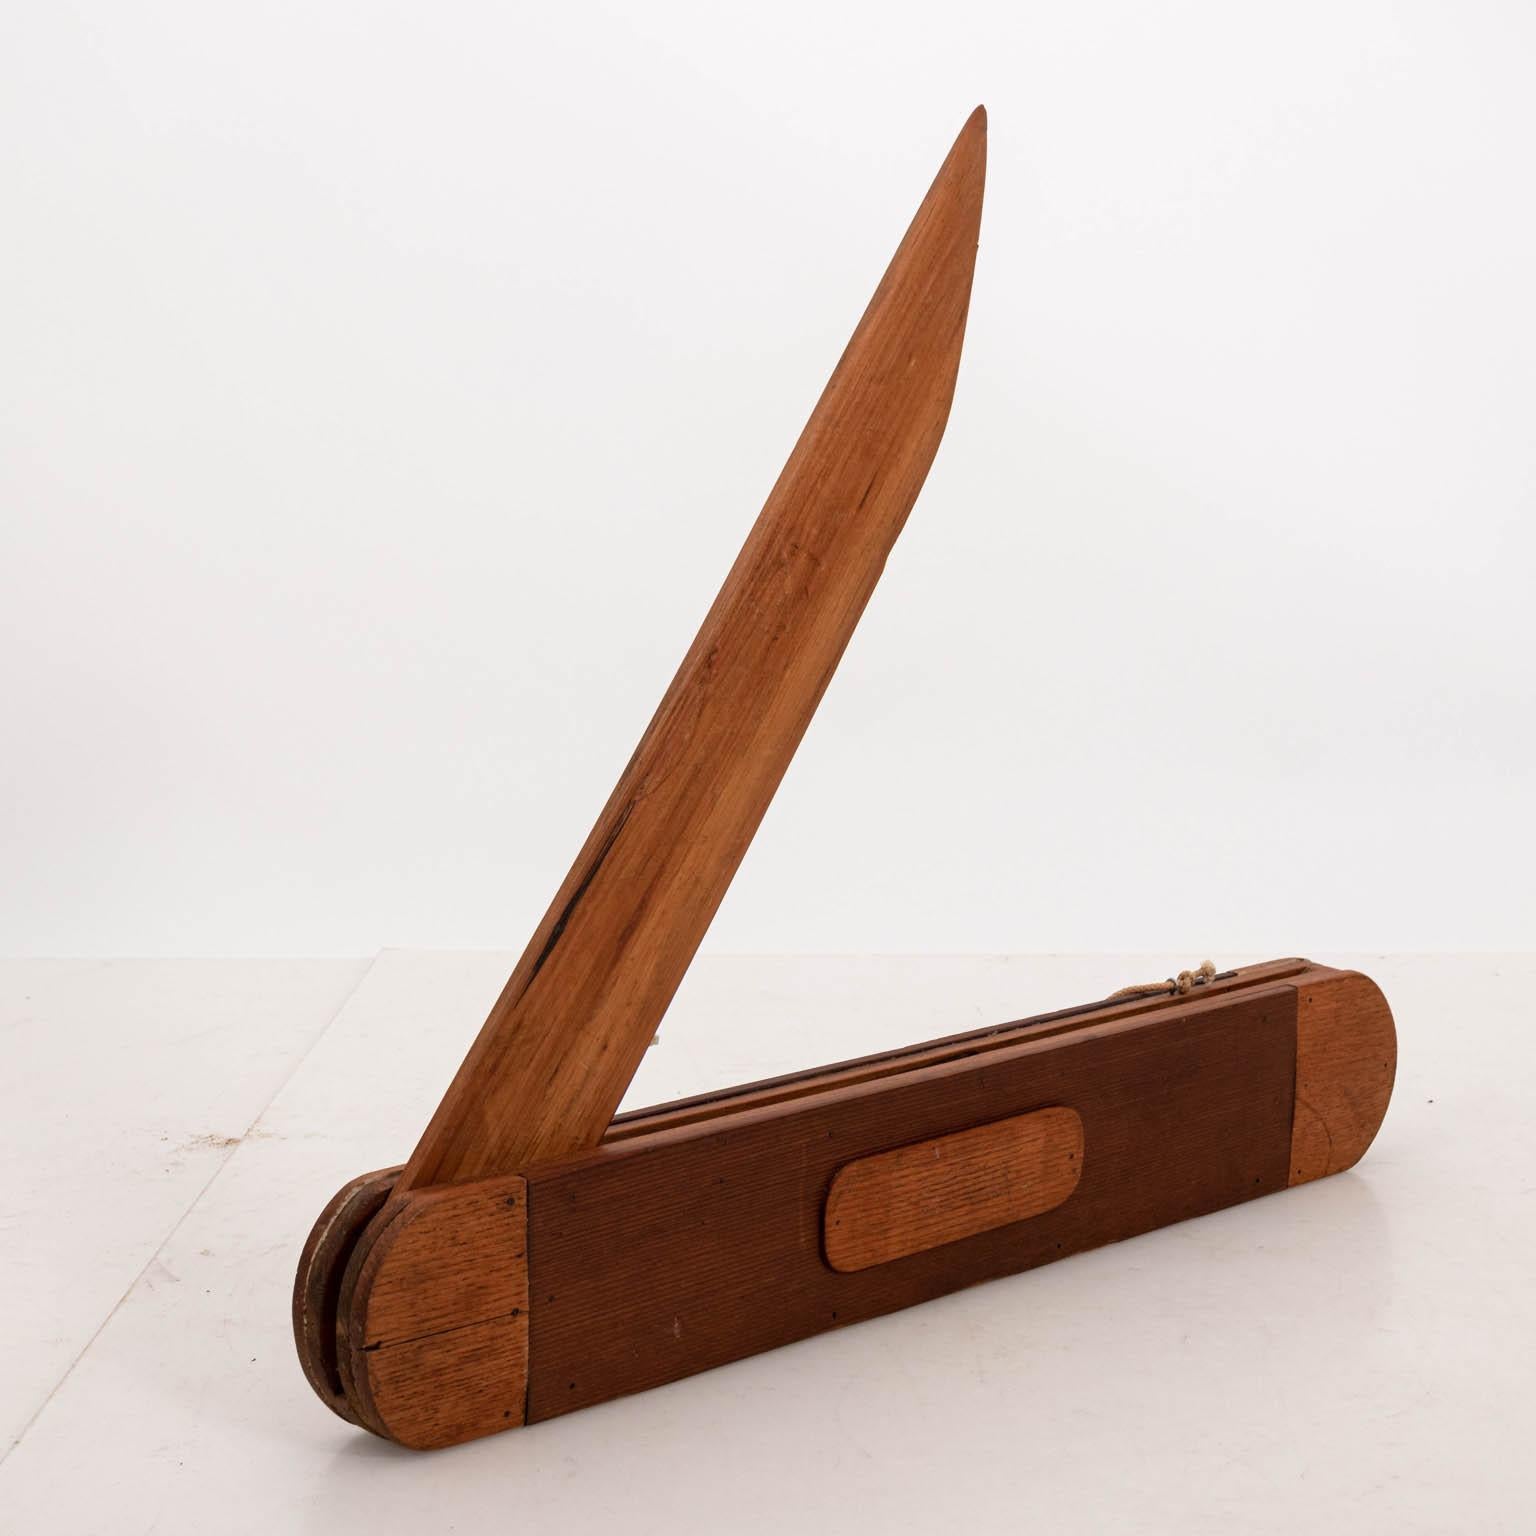 Large Folk Art pocket knife store display made of mixed wood, circa 1950s. The piece closes and opens as well. Please note of wear consistent with age including minor wood loss and chips.